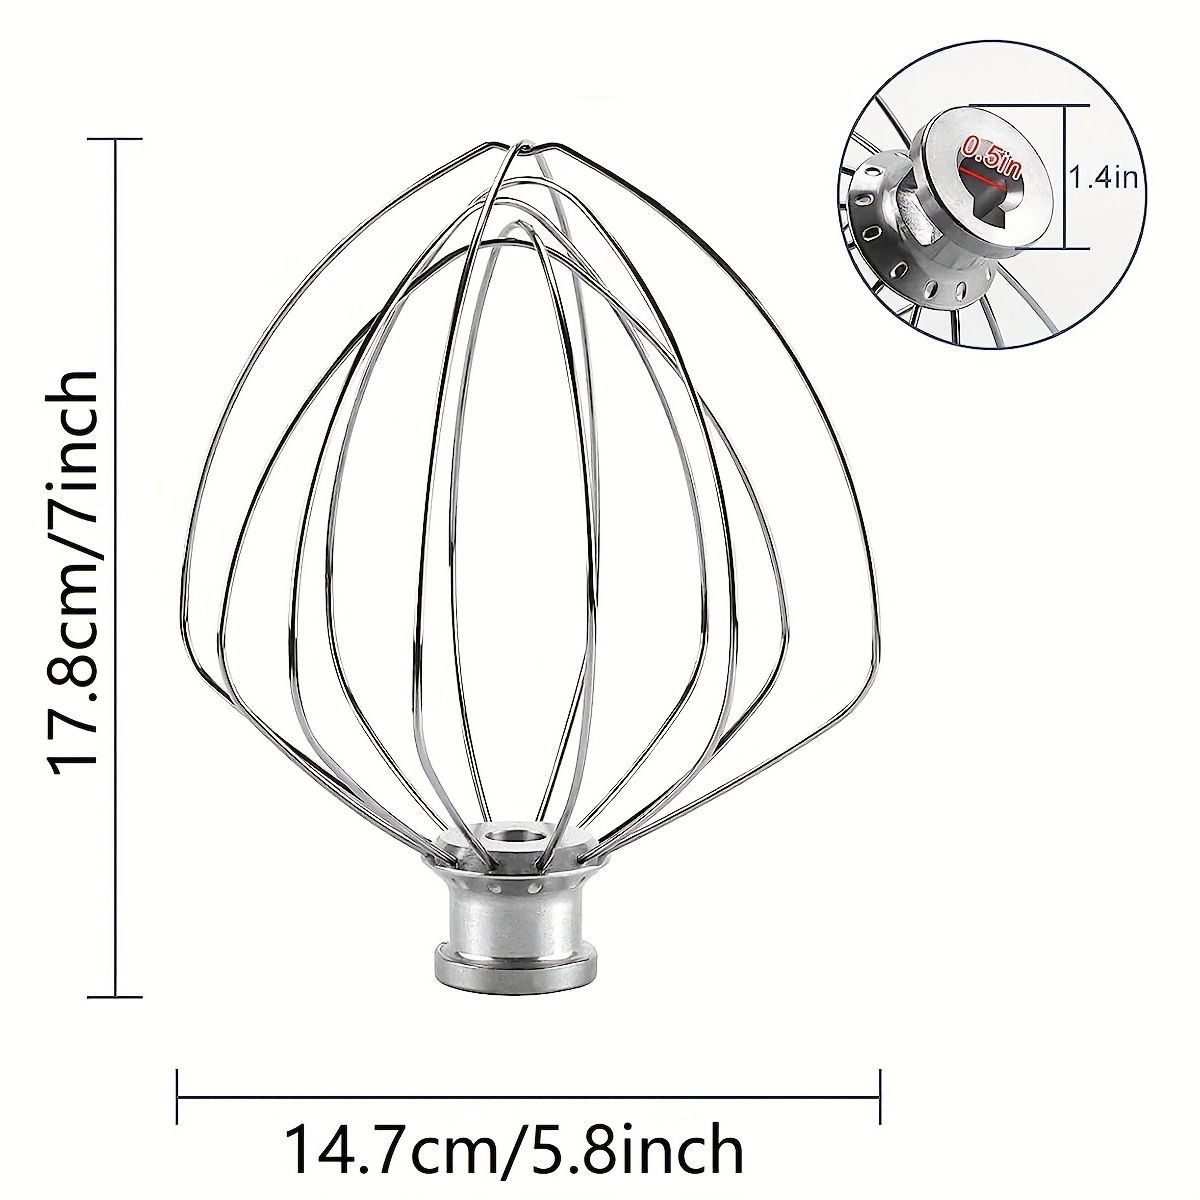  KN256WW Stainless Steel Whisk Attachment for KitchenAid 6 Quart  Bowl-Lift Stand Mixer 6-Wire Whip Attachment for Kitchen Aid Accessories:  Home & Kitchen